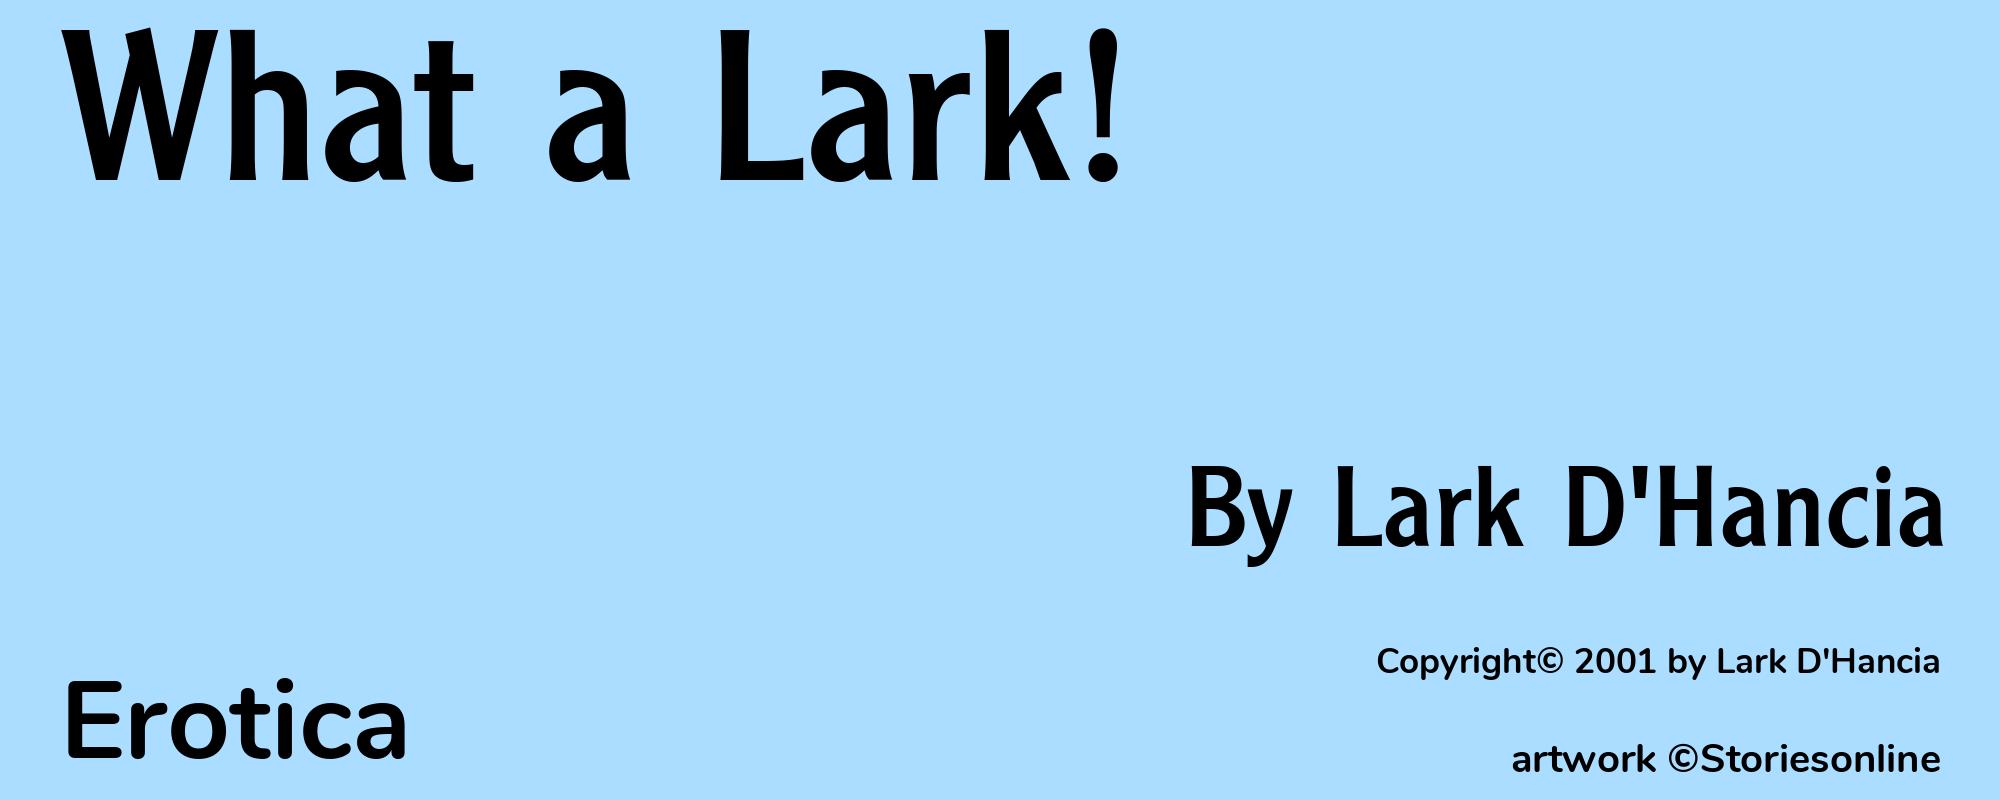 What a Lark! - Cover